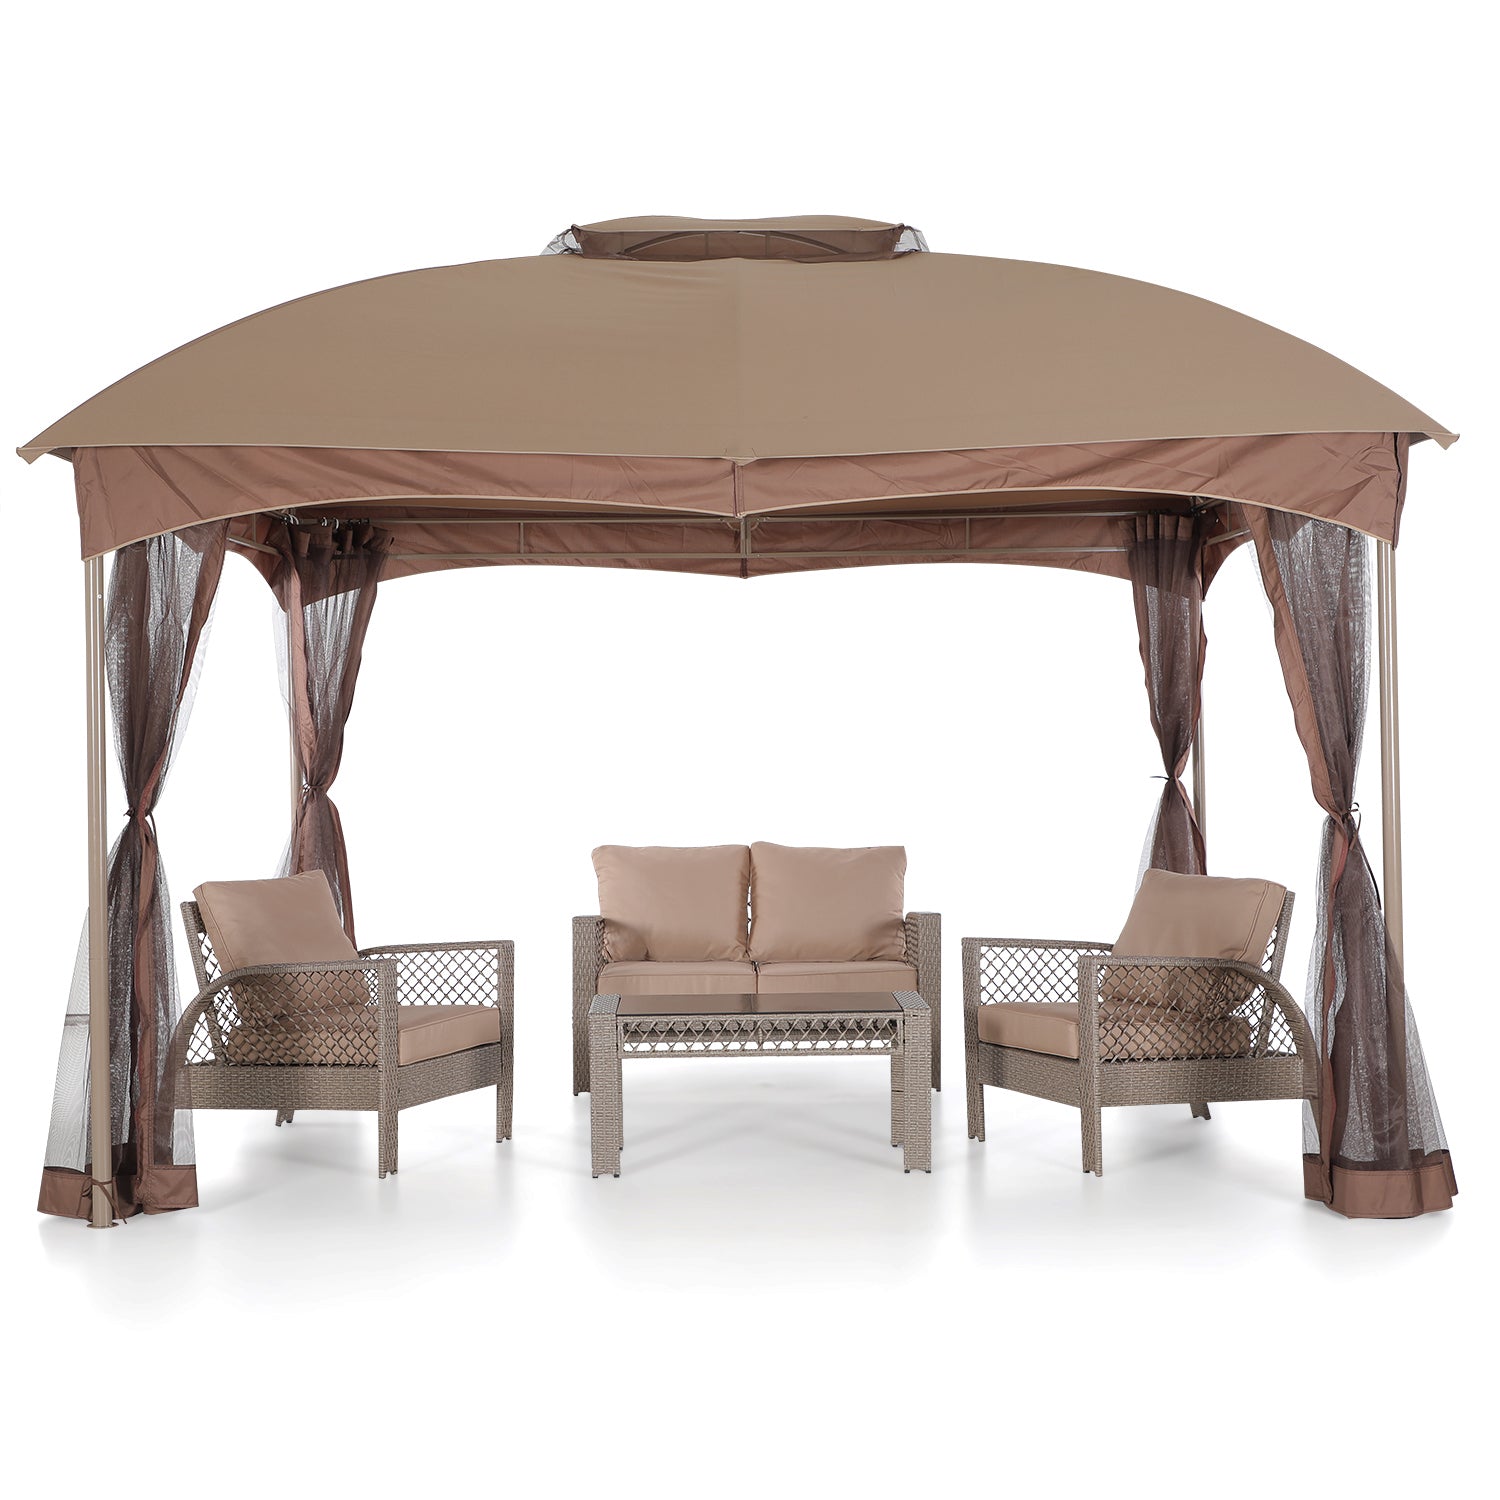 Phi Villa 2 Sizes Soft-top Canopy, Double-roof Outdoor Gazebo with Mesh Netting Curtains